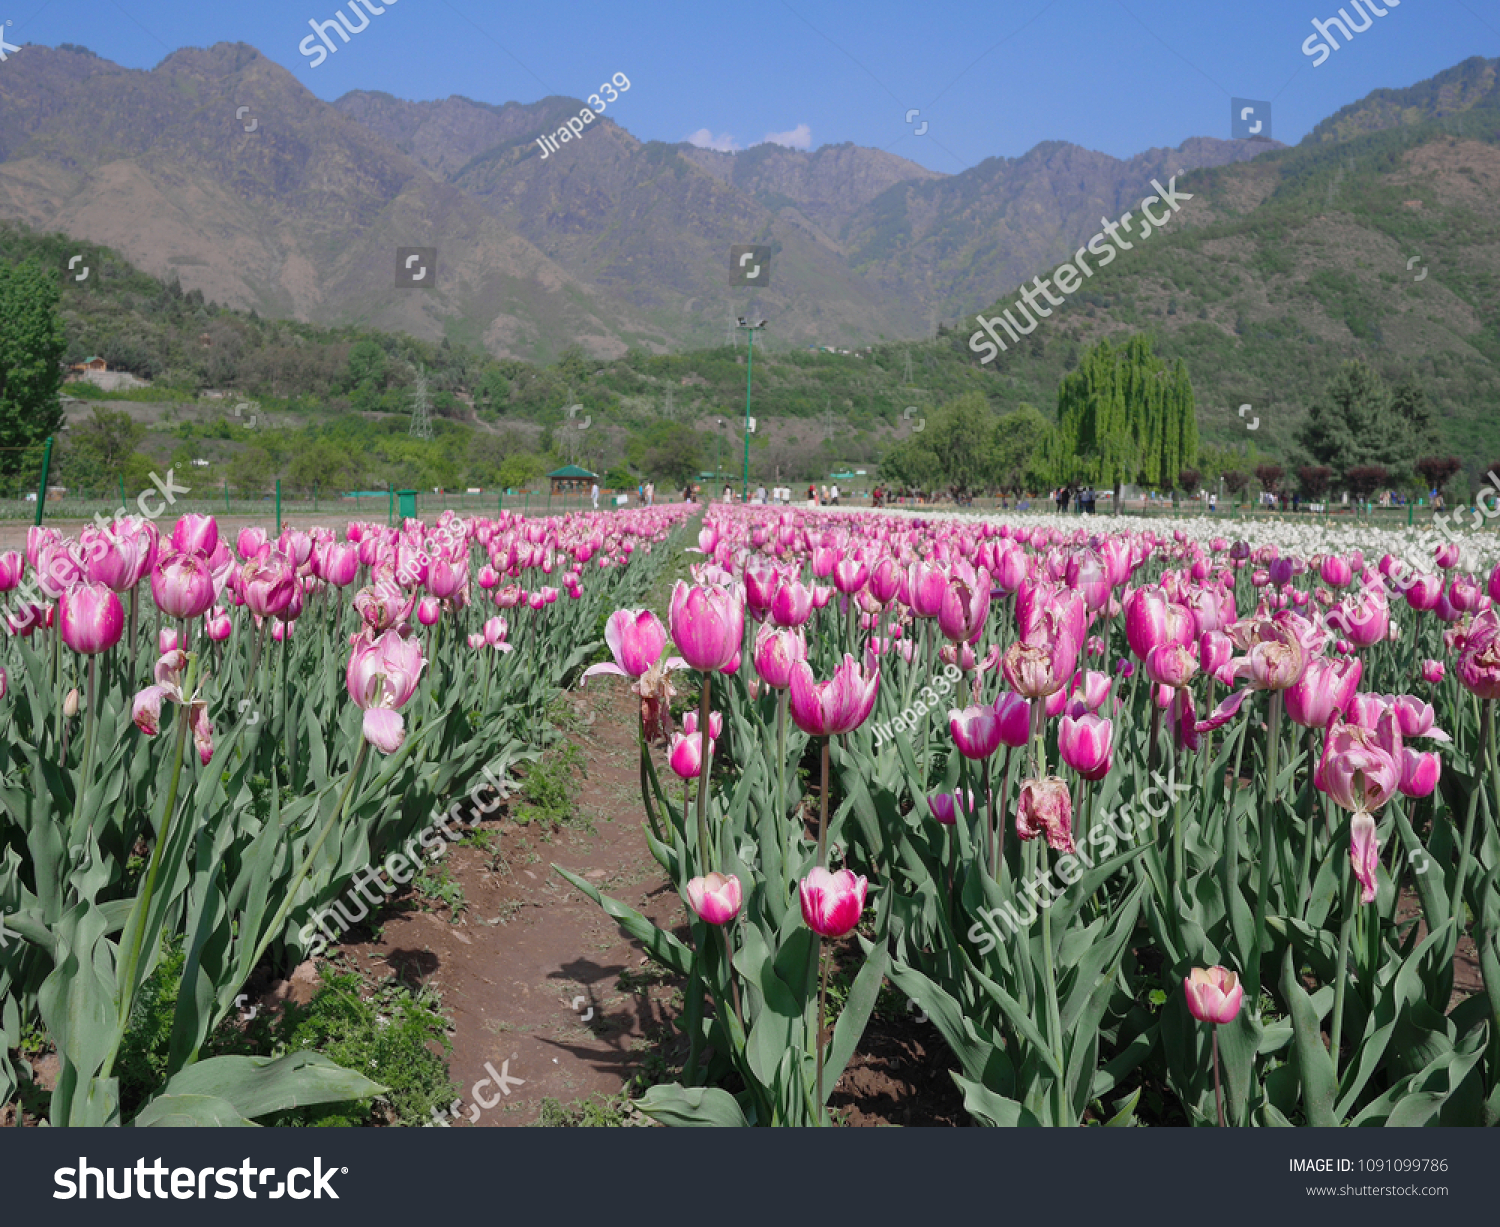 Tulip Sri Nagar Kashmir
Organized in April Tulips in Kashmir have a wide variety of varieties of about 60 species.  Discover the tulip mating to be different  colors from the existing. #1091099786